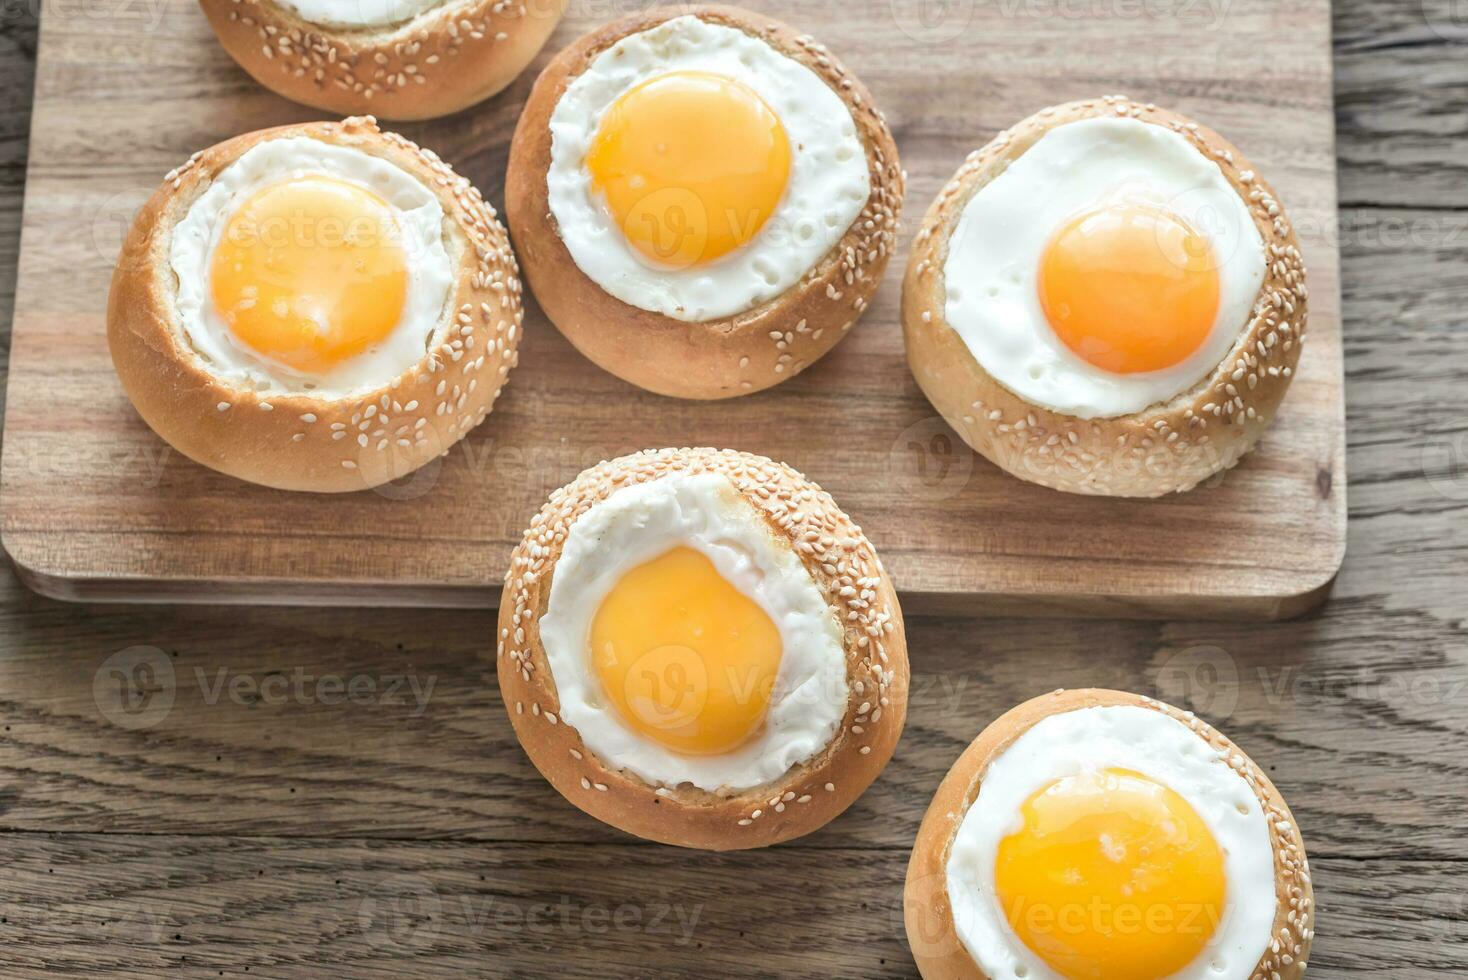 Egg-in-a-hole buns on the wooden board photo